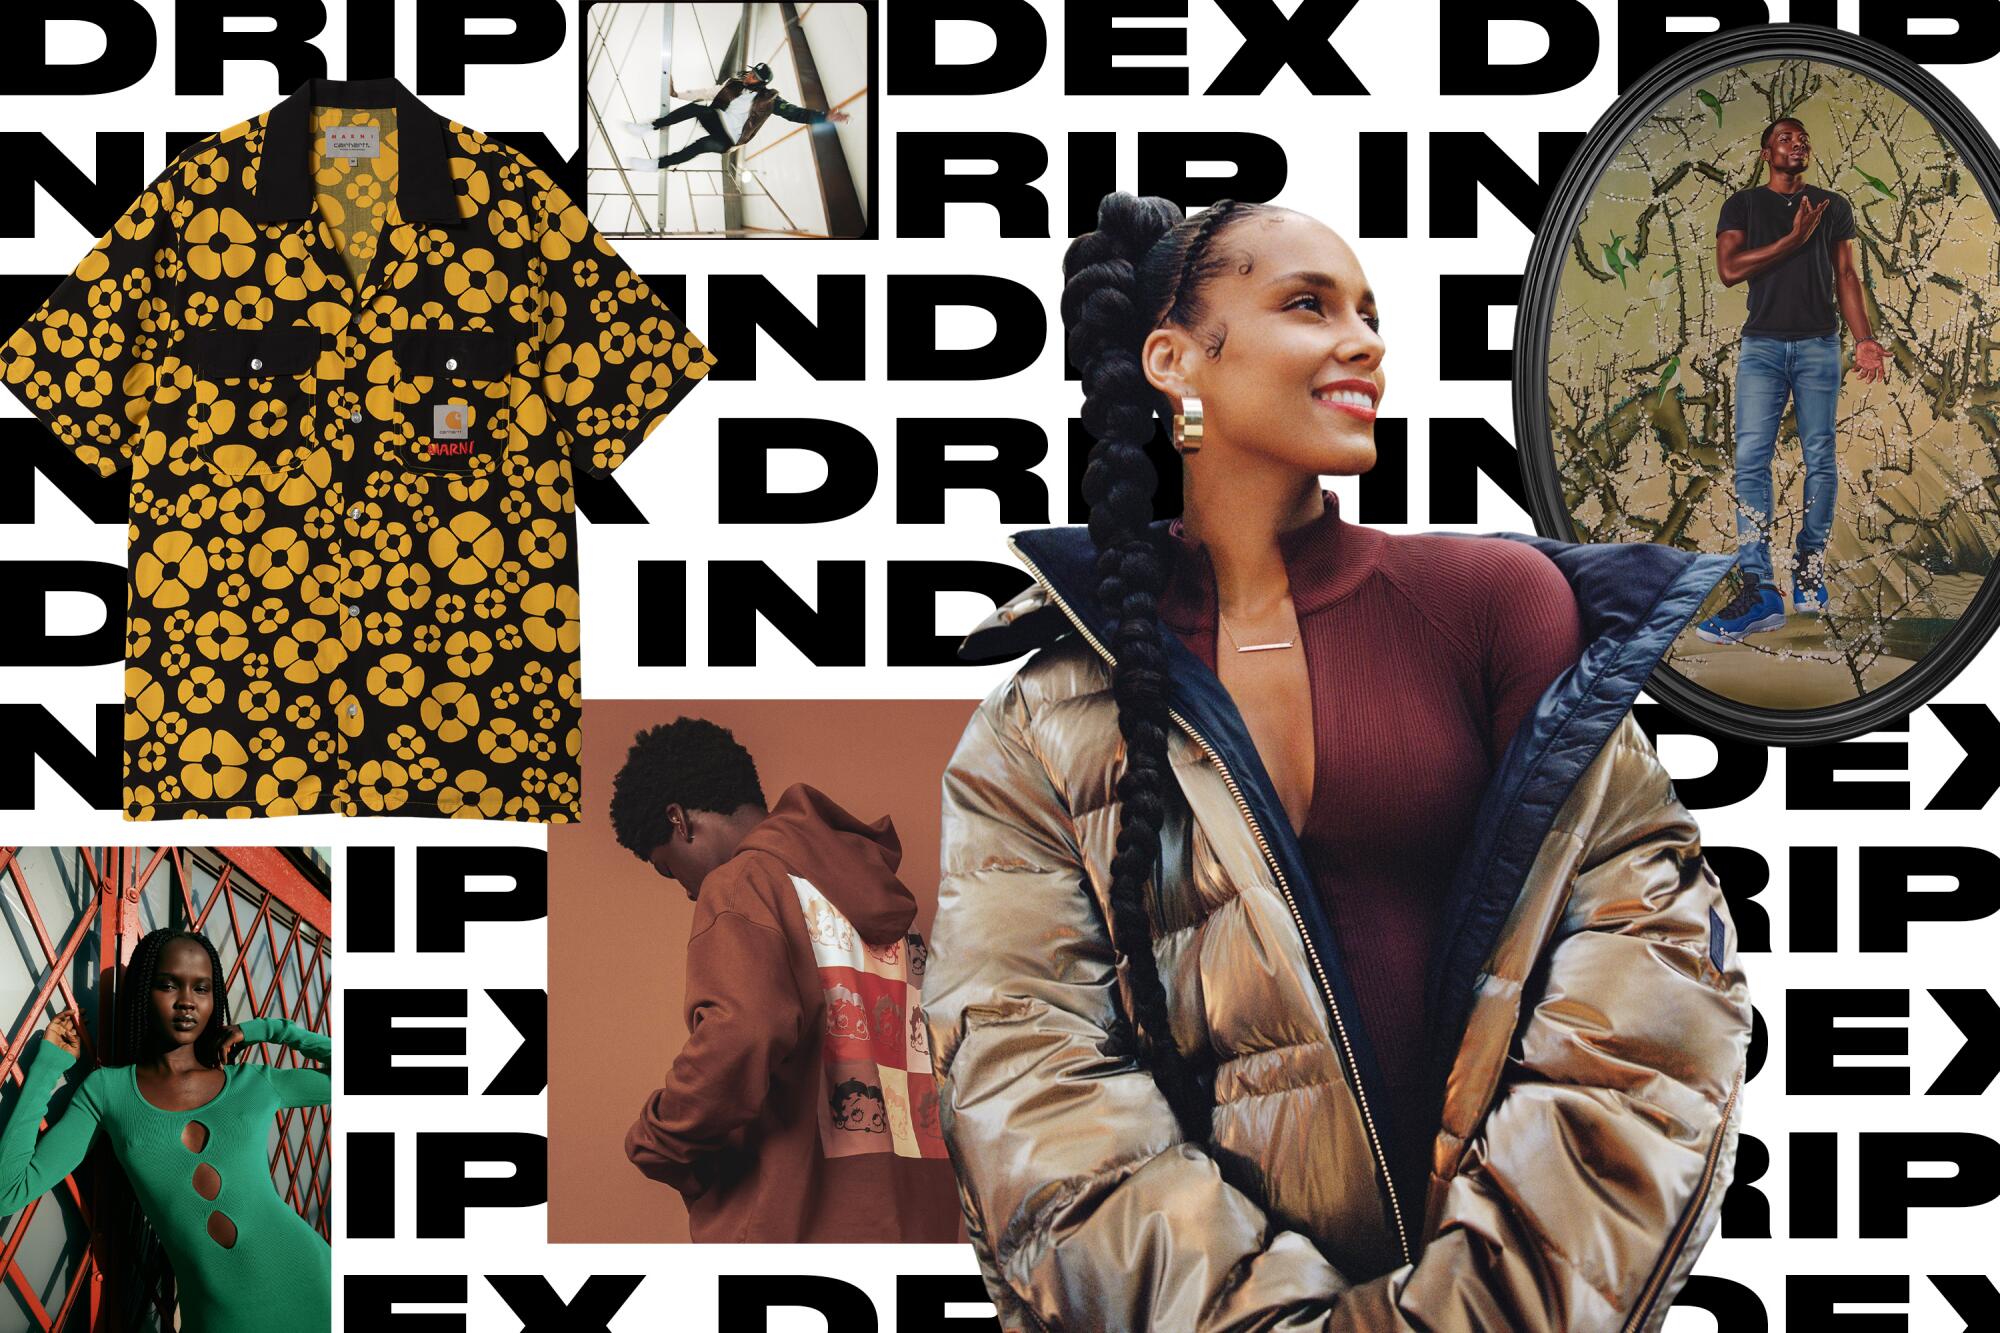 A collage features different fashion products on top of a pattern of the words "drip index"